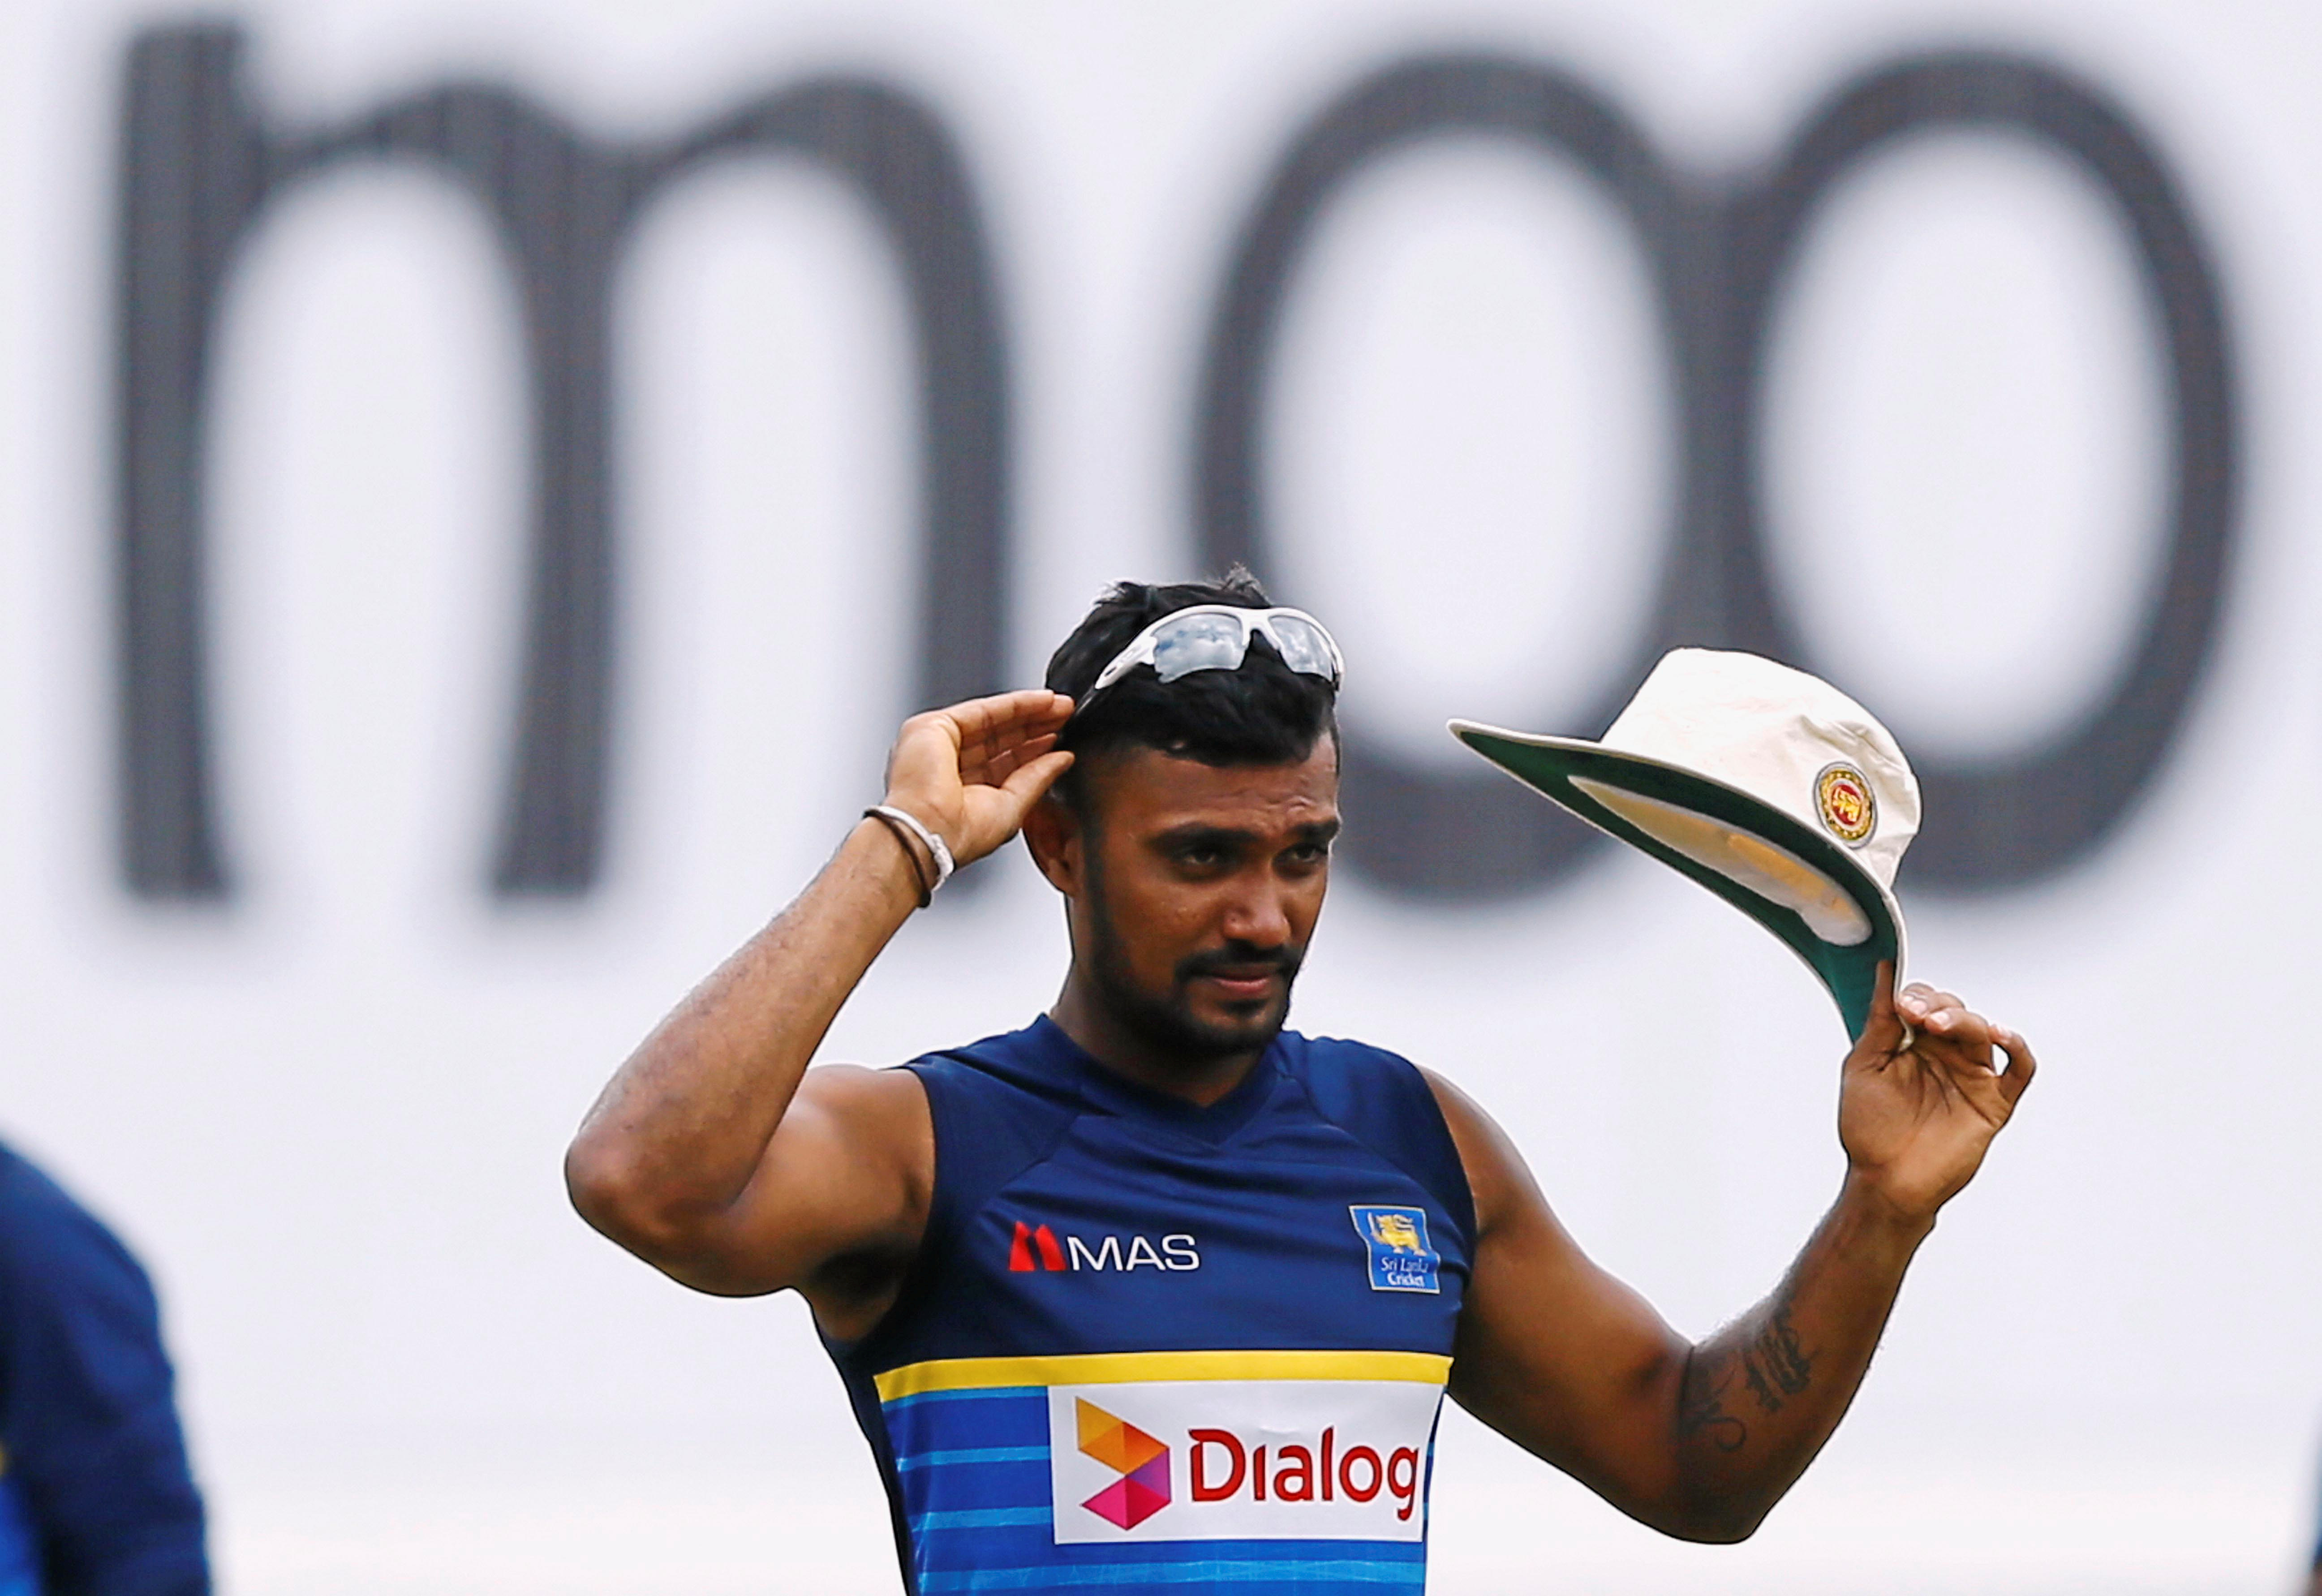 Sri Lankas Gunathilaka cleared of sexual assault charge in Australia Reuters picture image